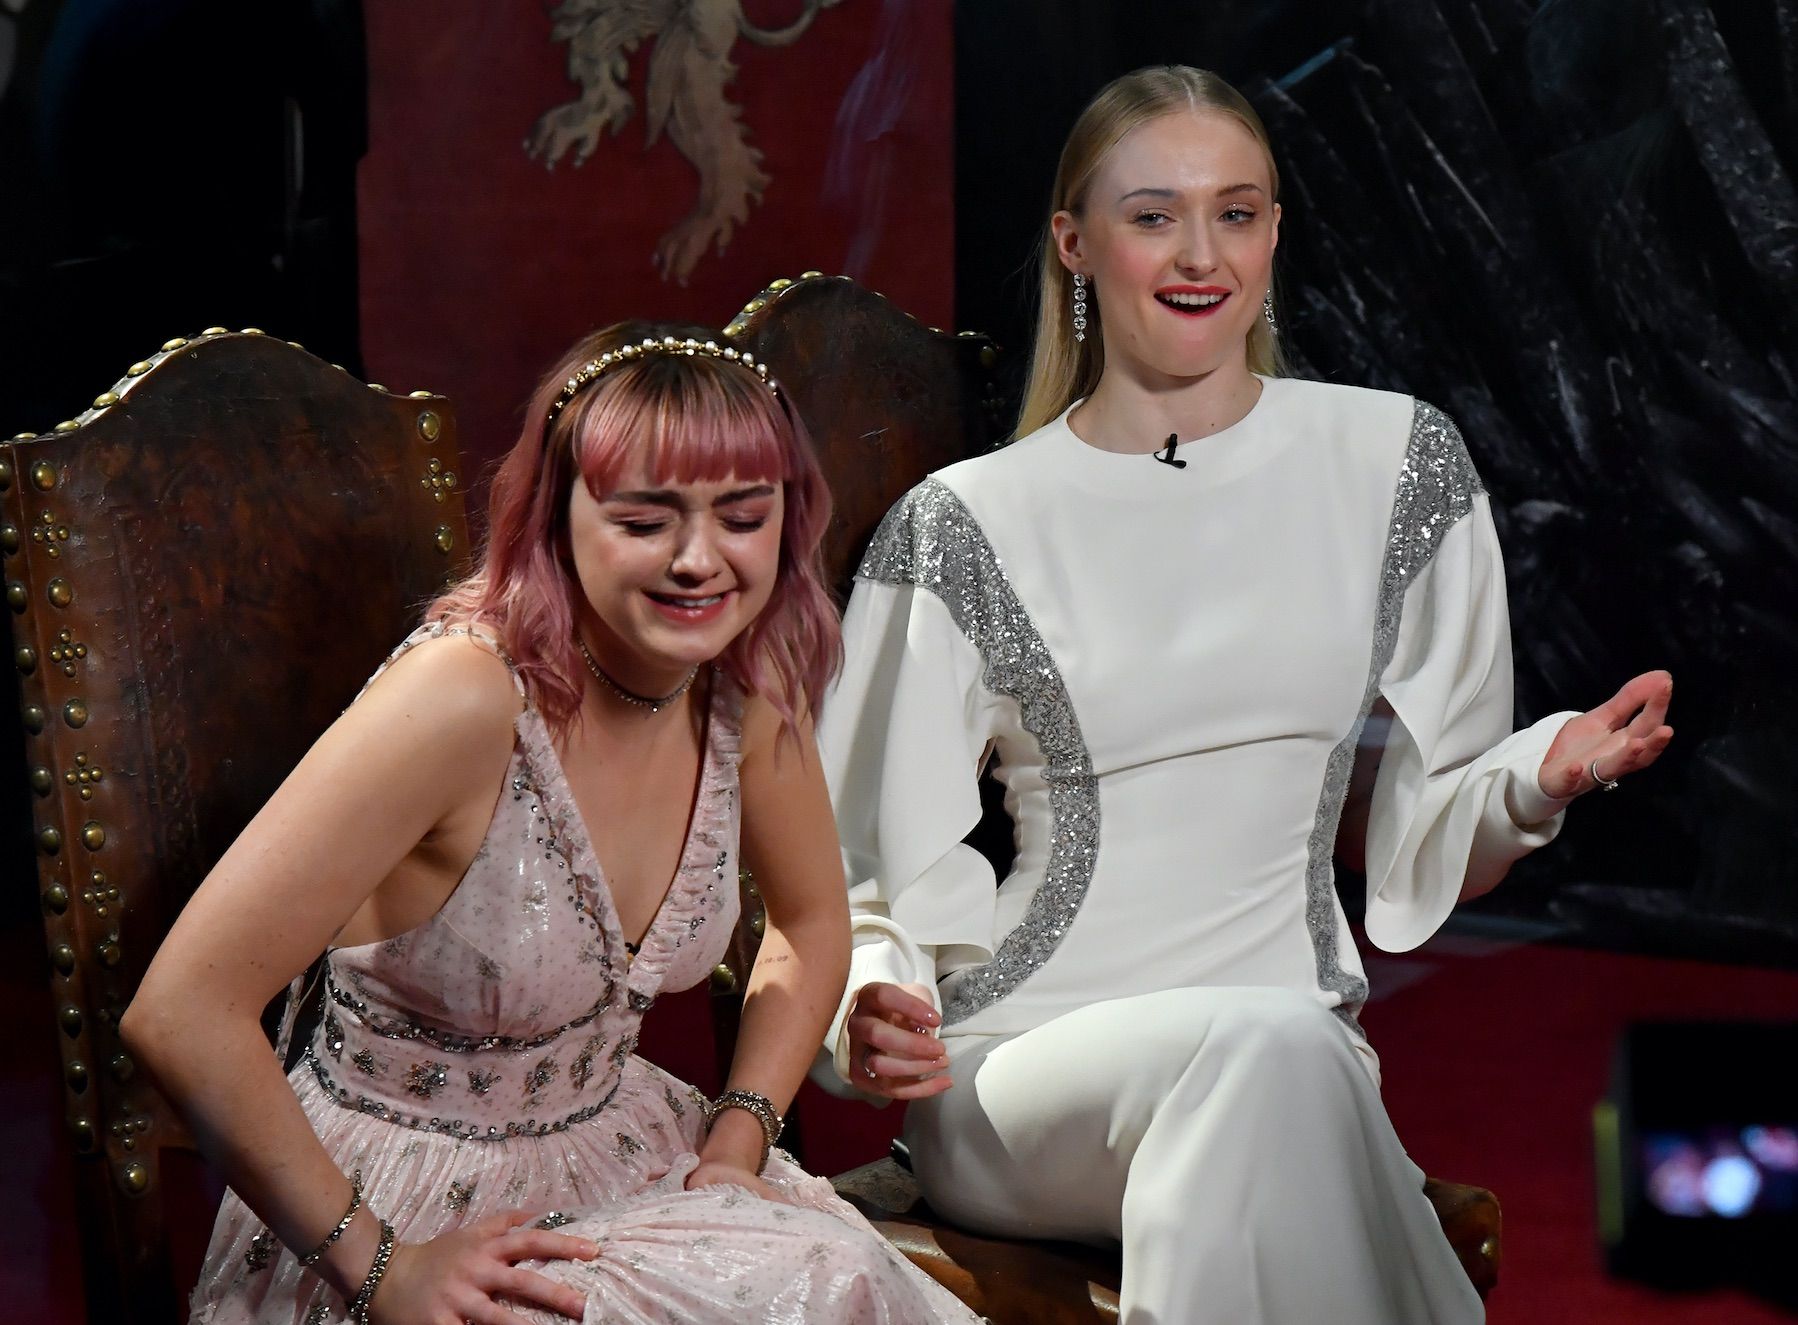 Game of Thrones: Sophie Turner asks Maisie Williams to be